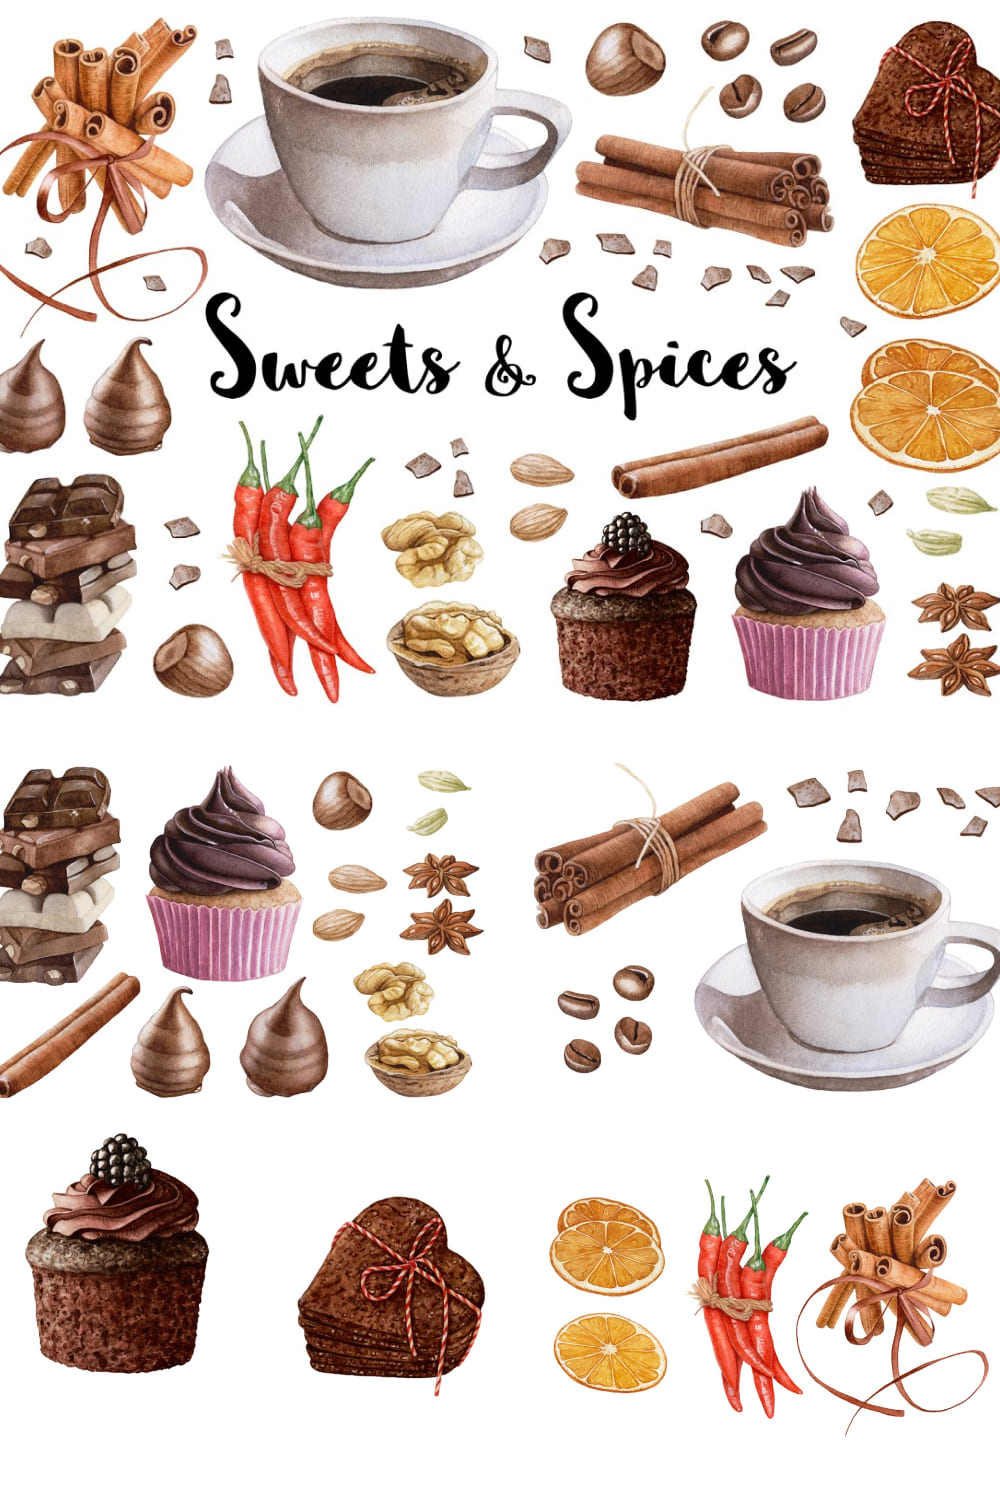 03 watercolor sweets spices1000x1500 260